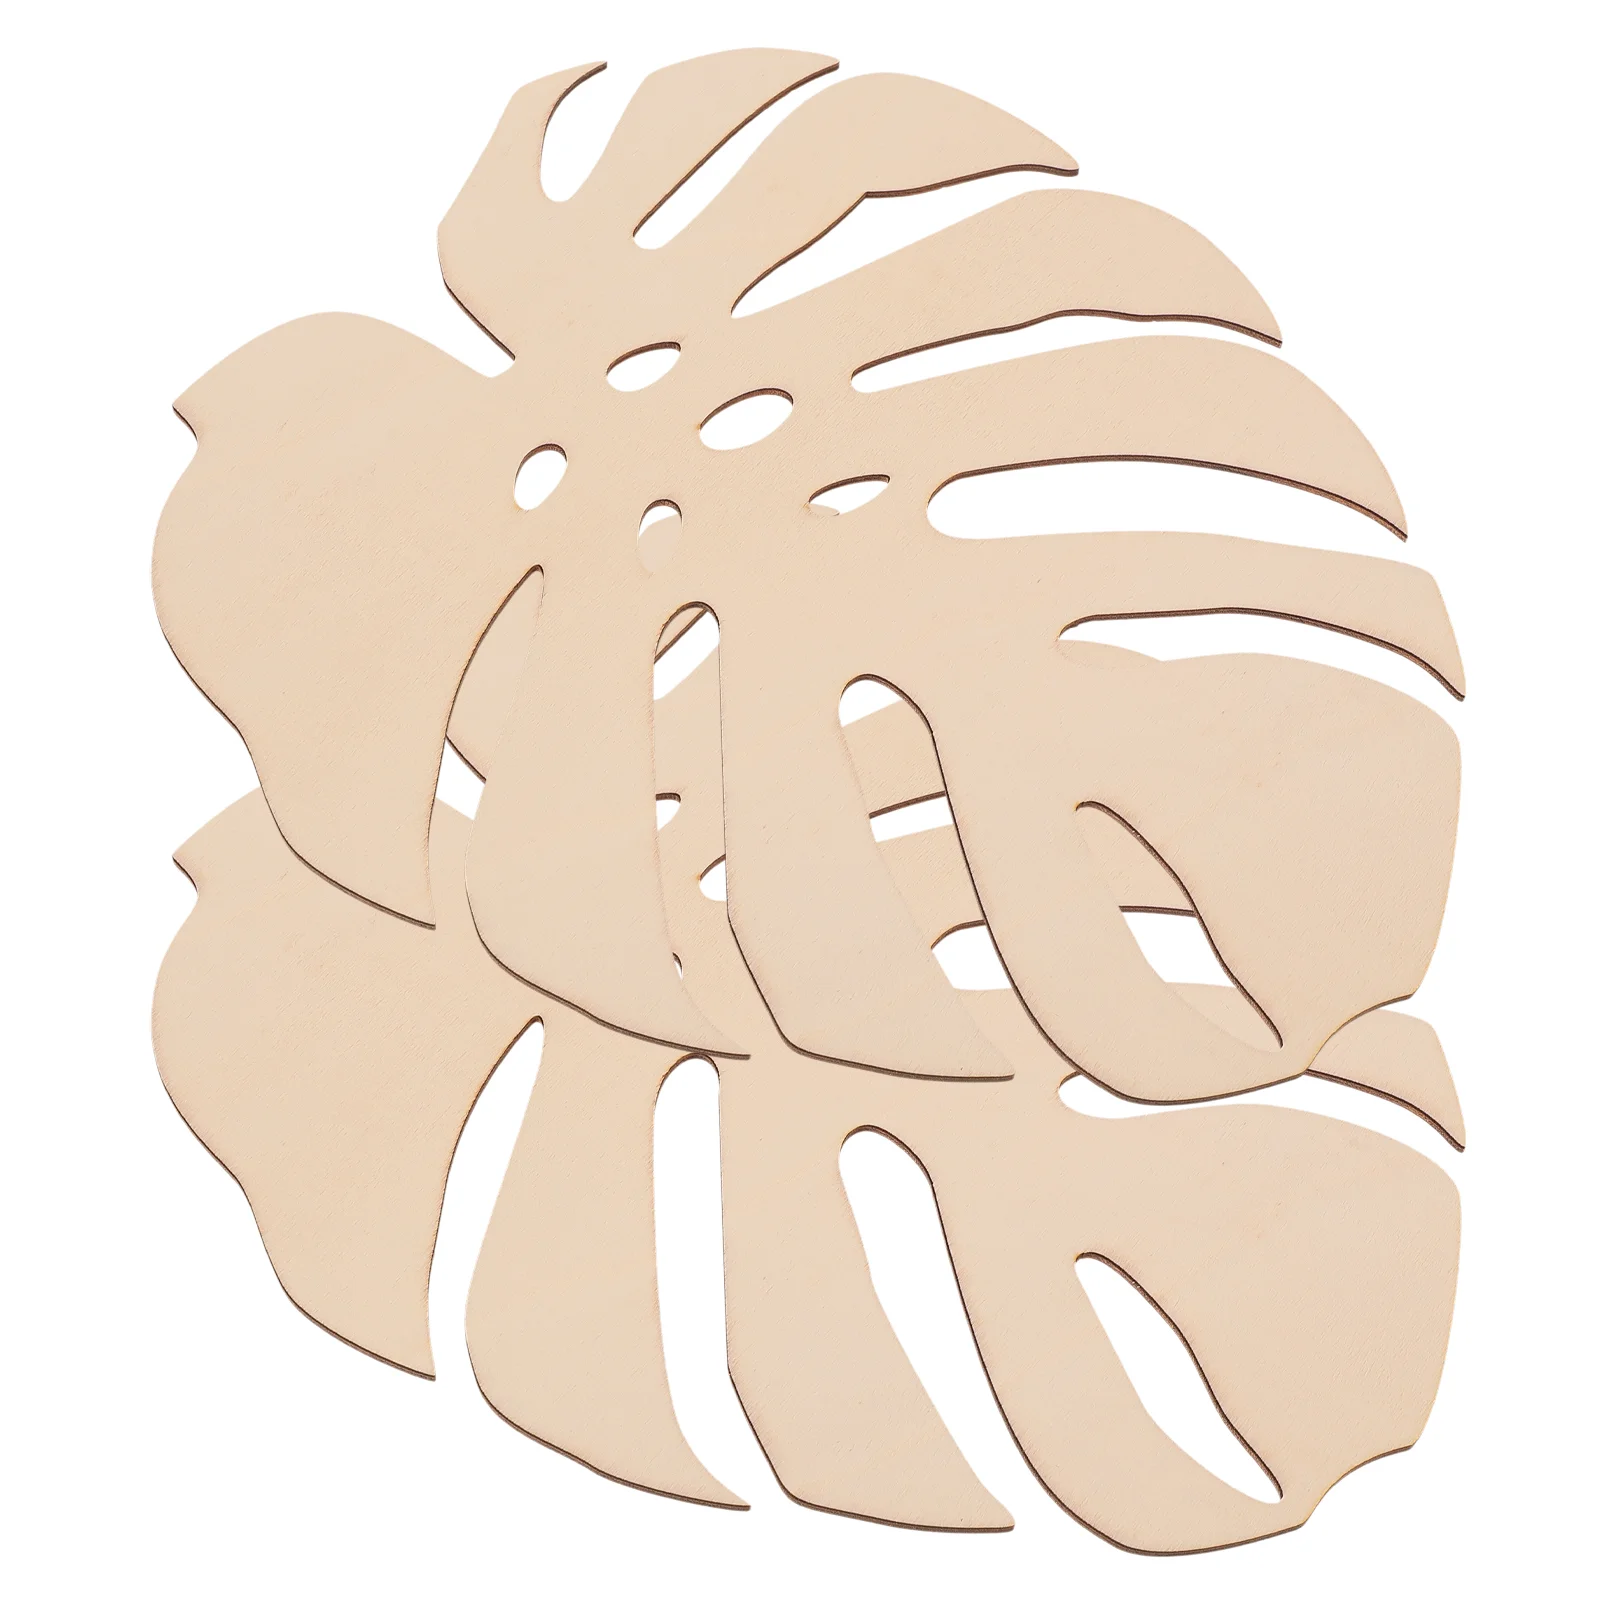 

2 Pcs Wooden Monstera Unpainted Leaf Shaped Cutouts Kids' Room Décor Crafts Tags Decor DIY Hanging Color Crafting Blank